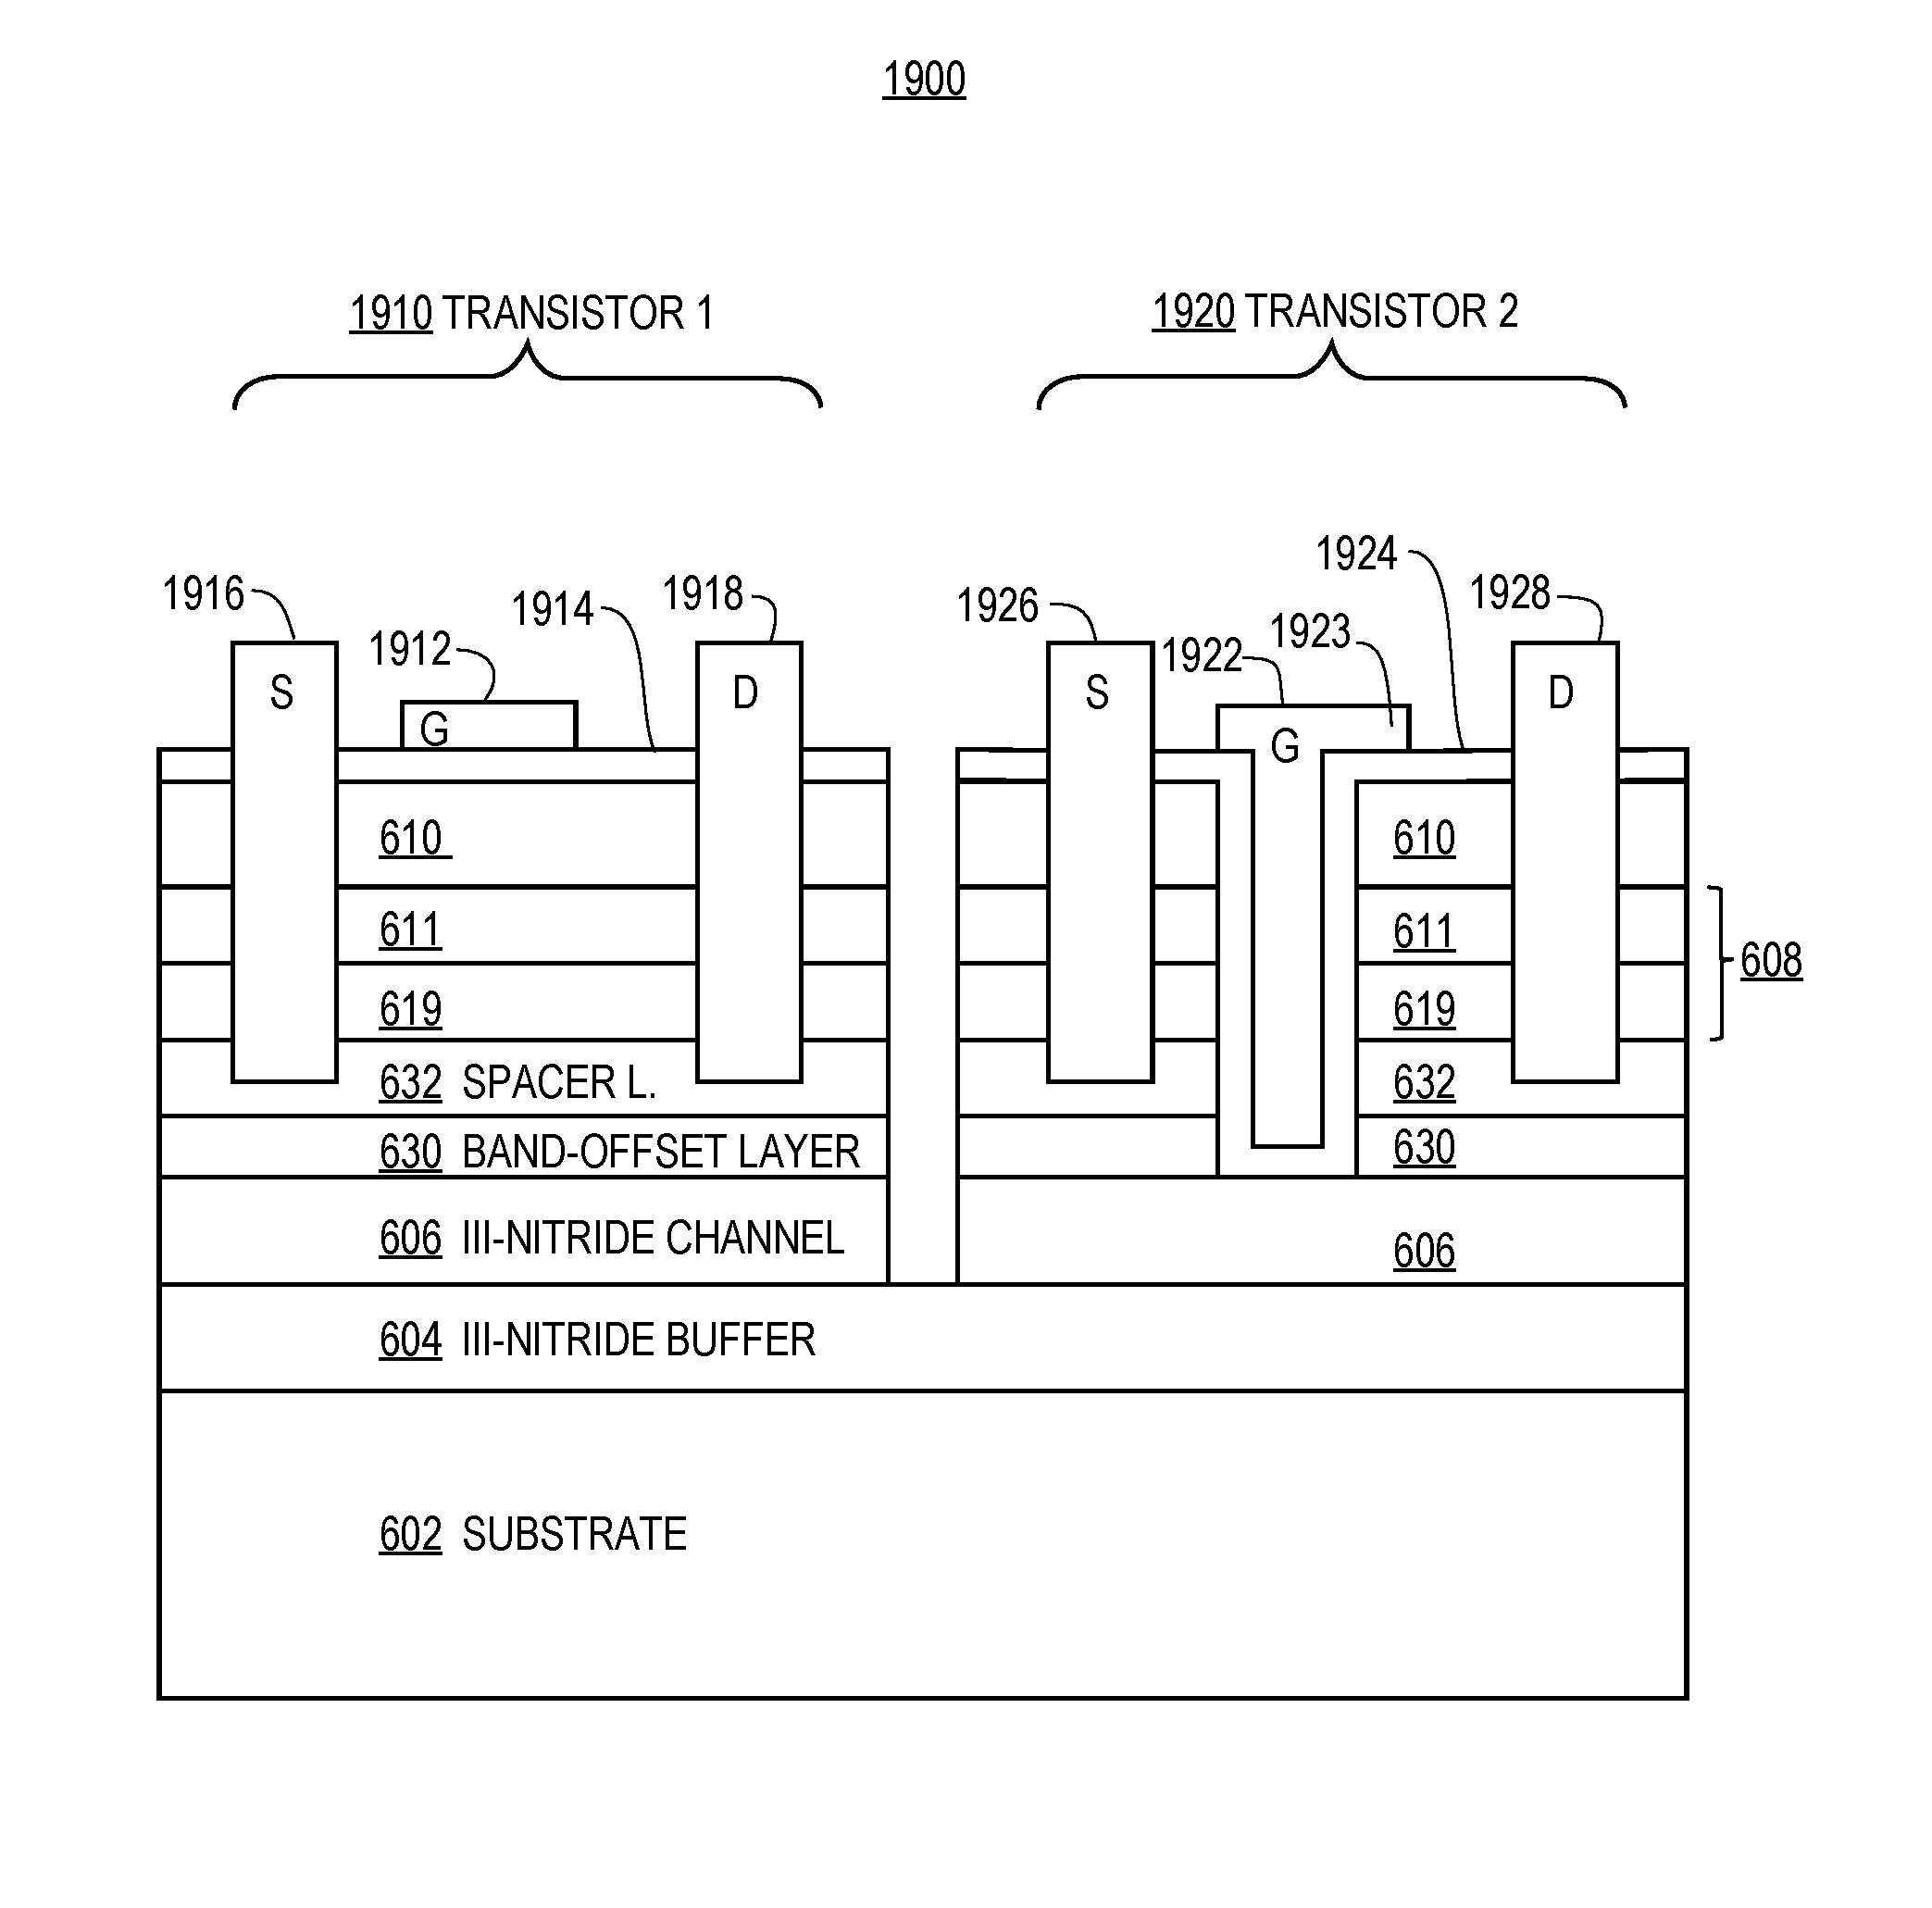 Semiconductor structure with a spacer layer